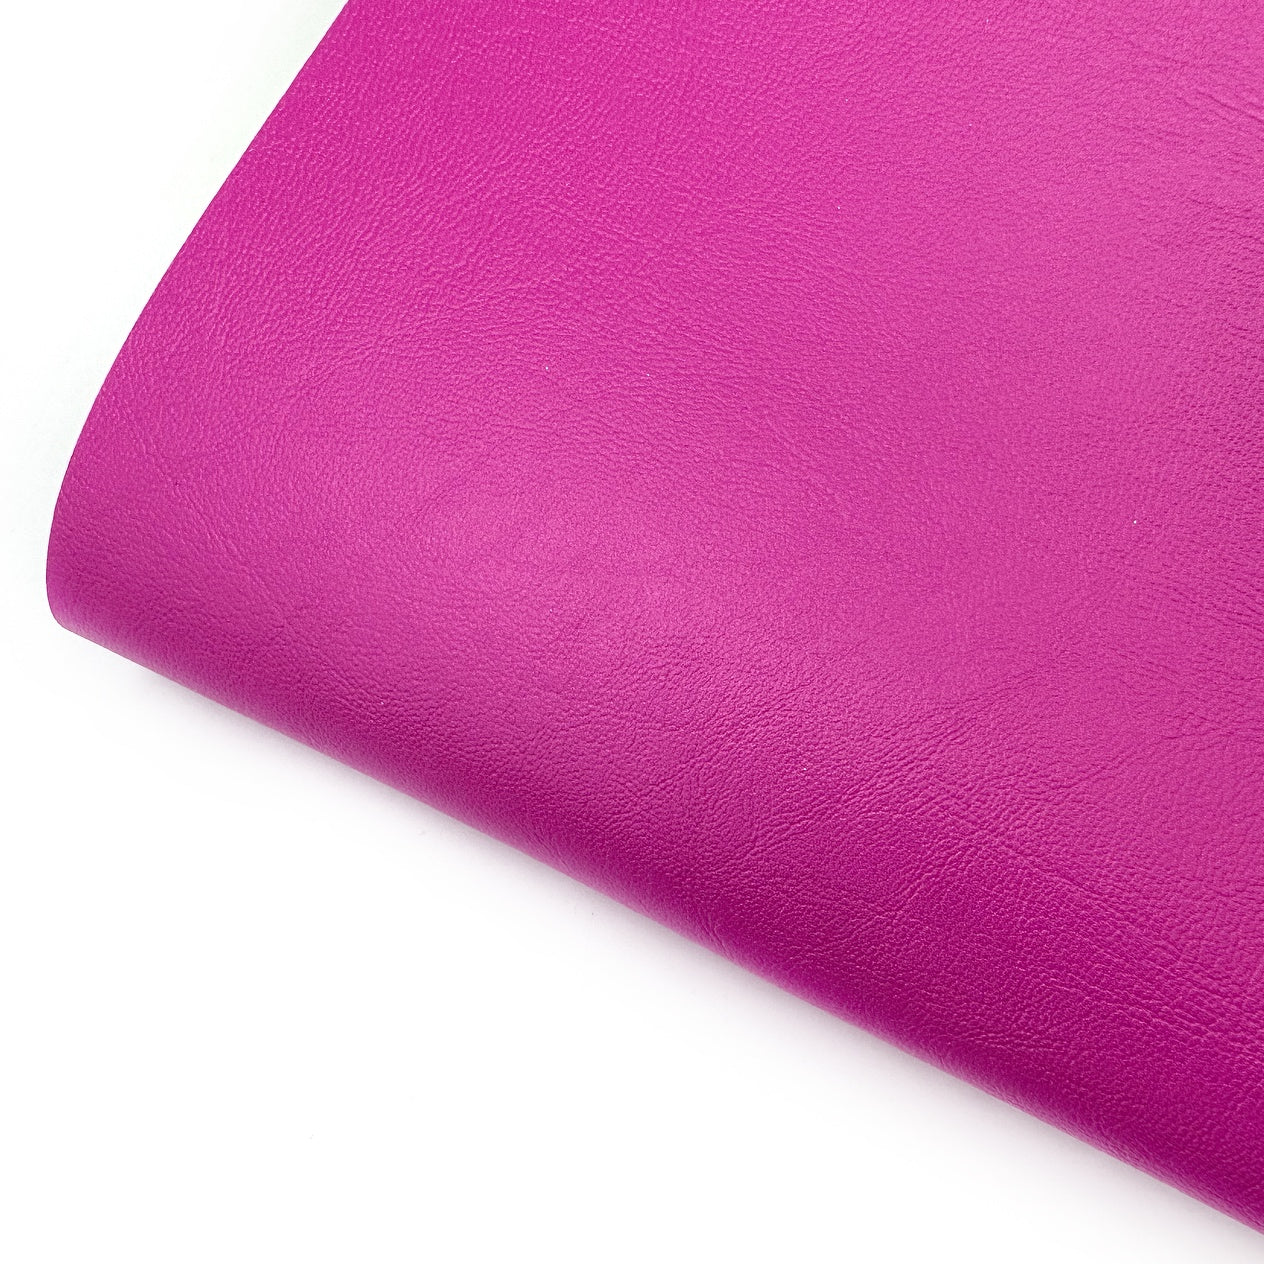 Roller Doll Pink Core Colour Premium Faux Leather Fabric Sheets